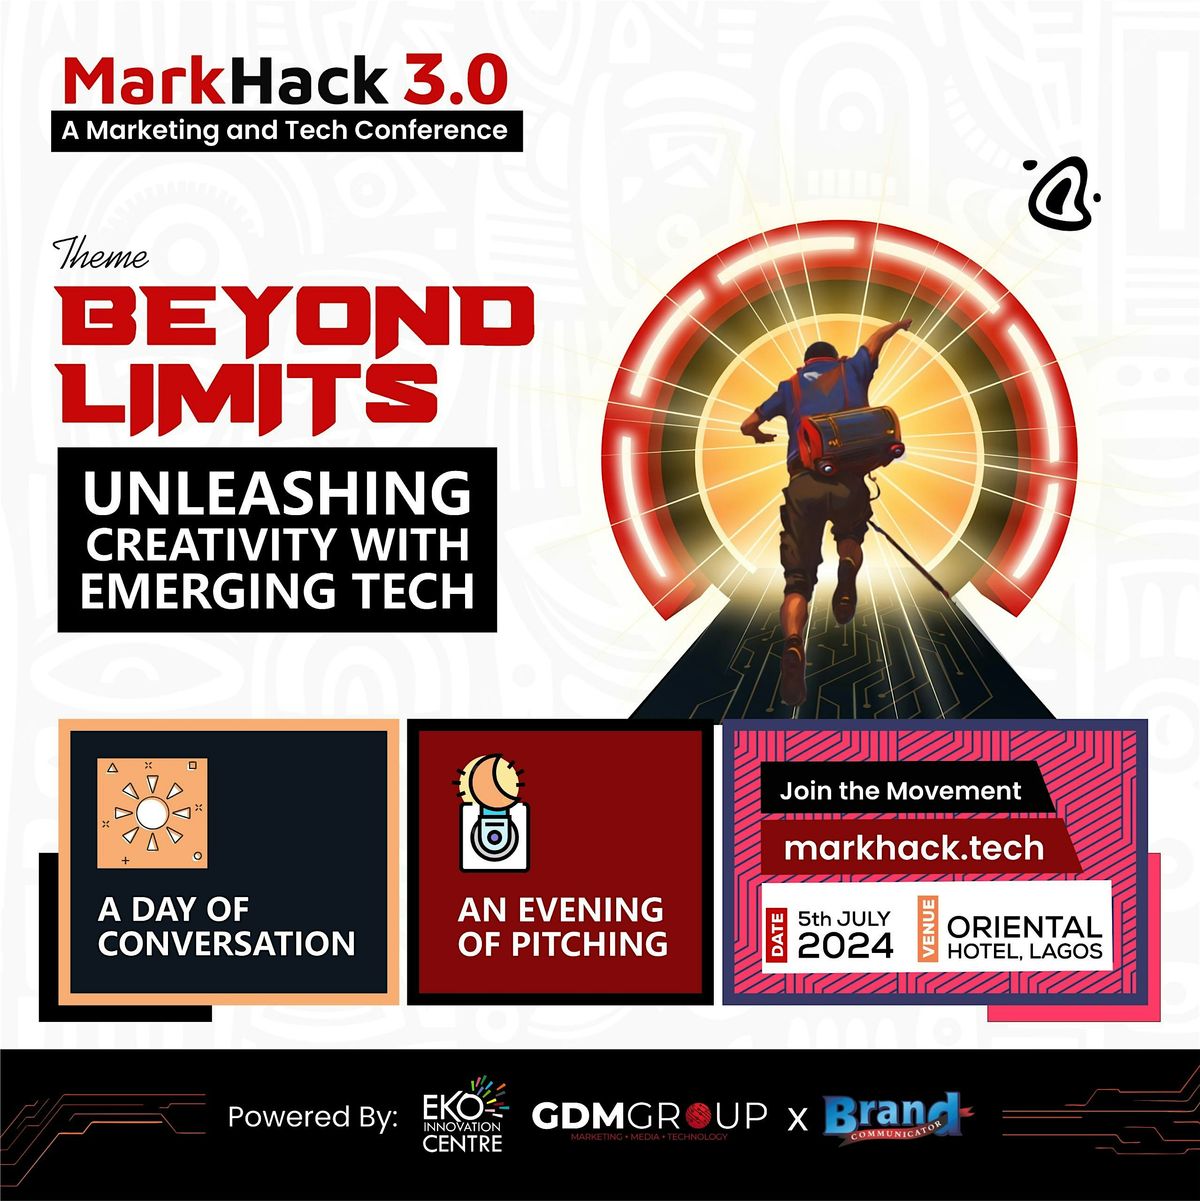 MarkHack 3.0 Conference